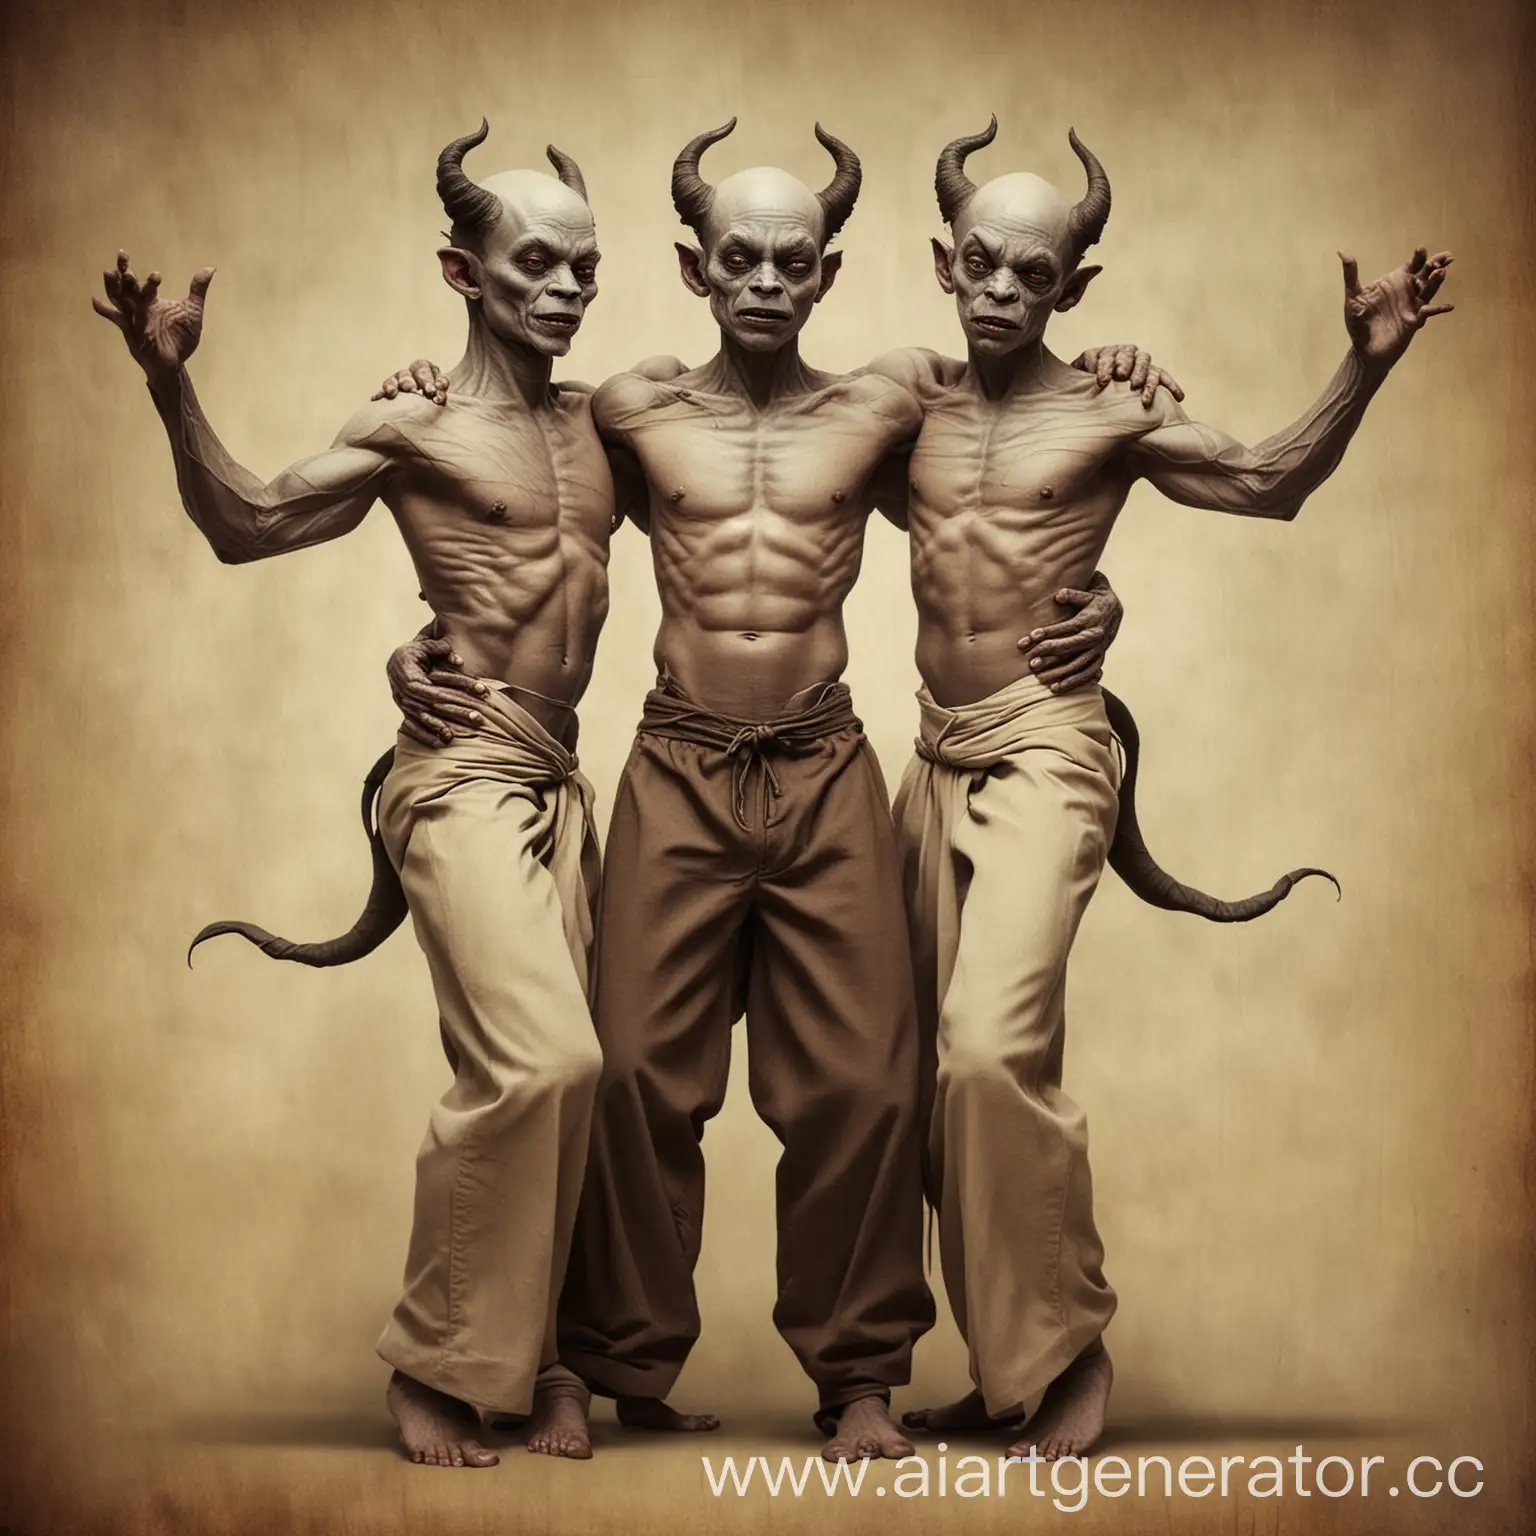 Male-Demon-Siamese-Twins-with-Raised-Arm-Connected-at-Hip-Level